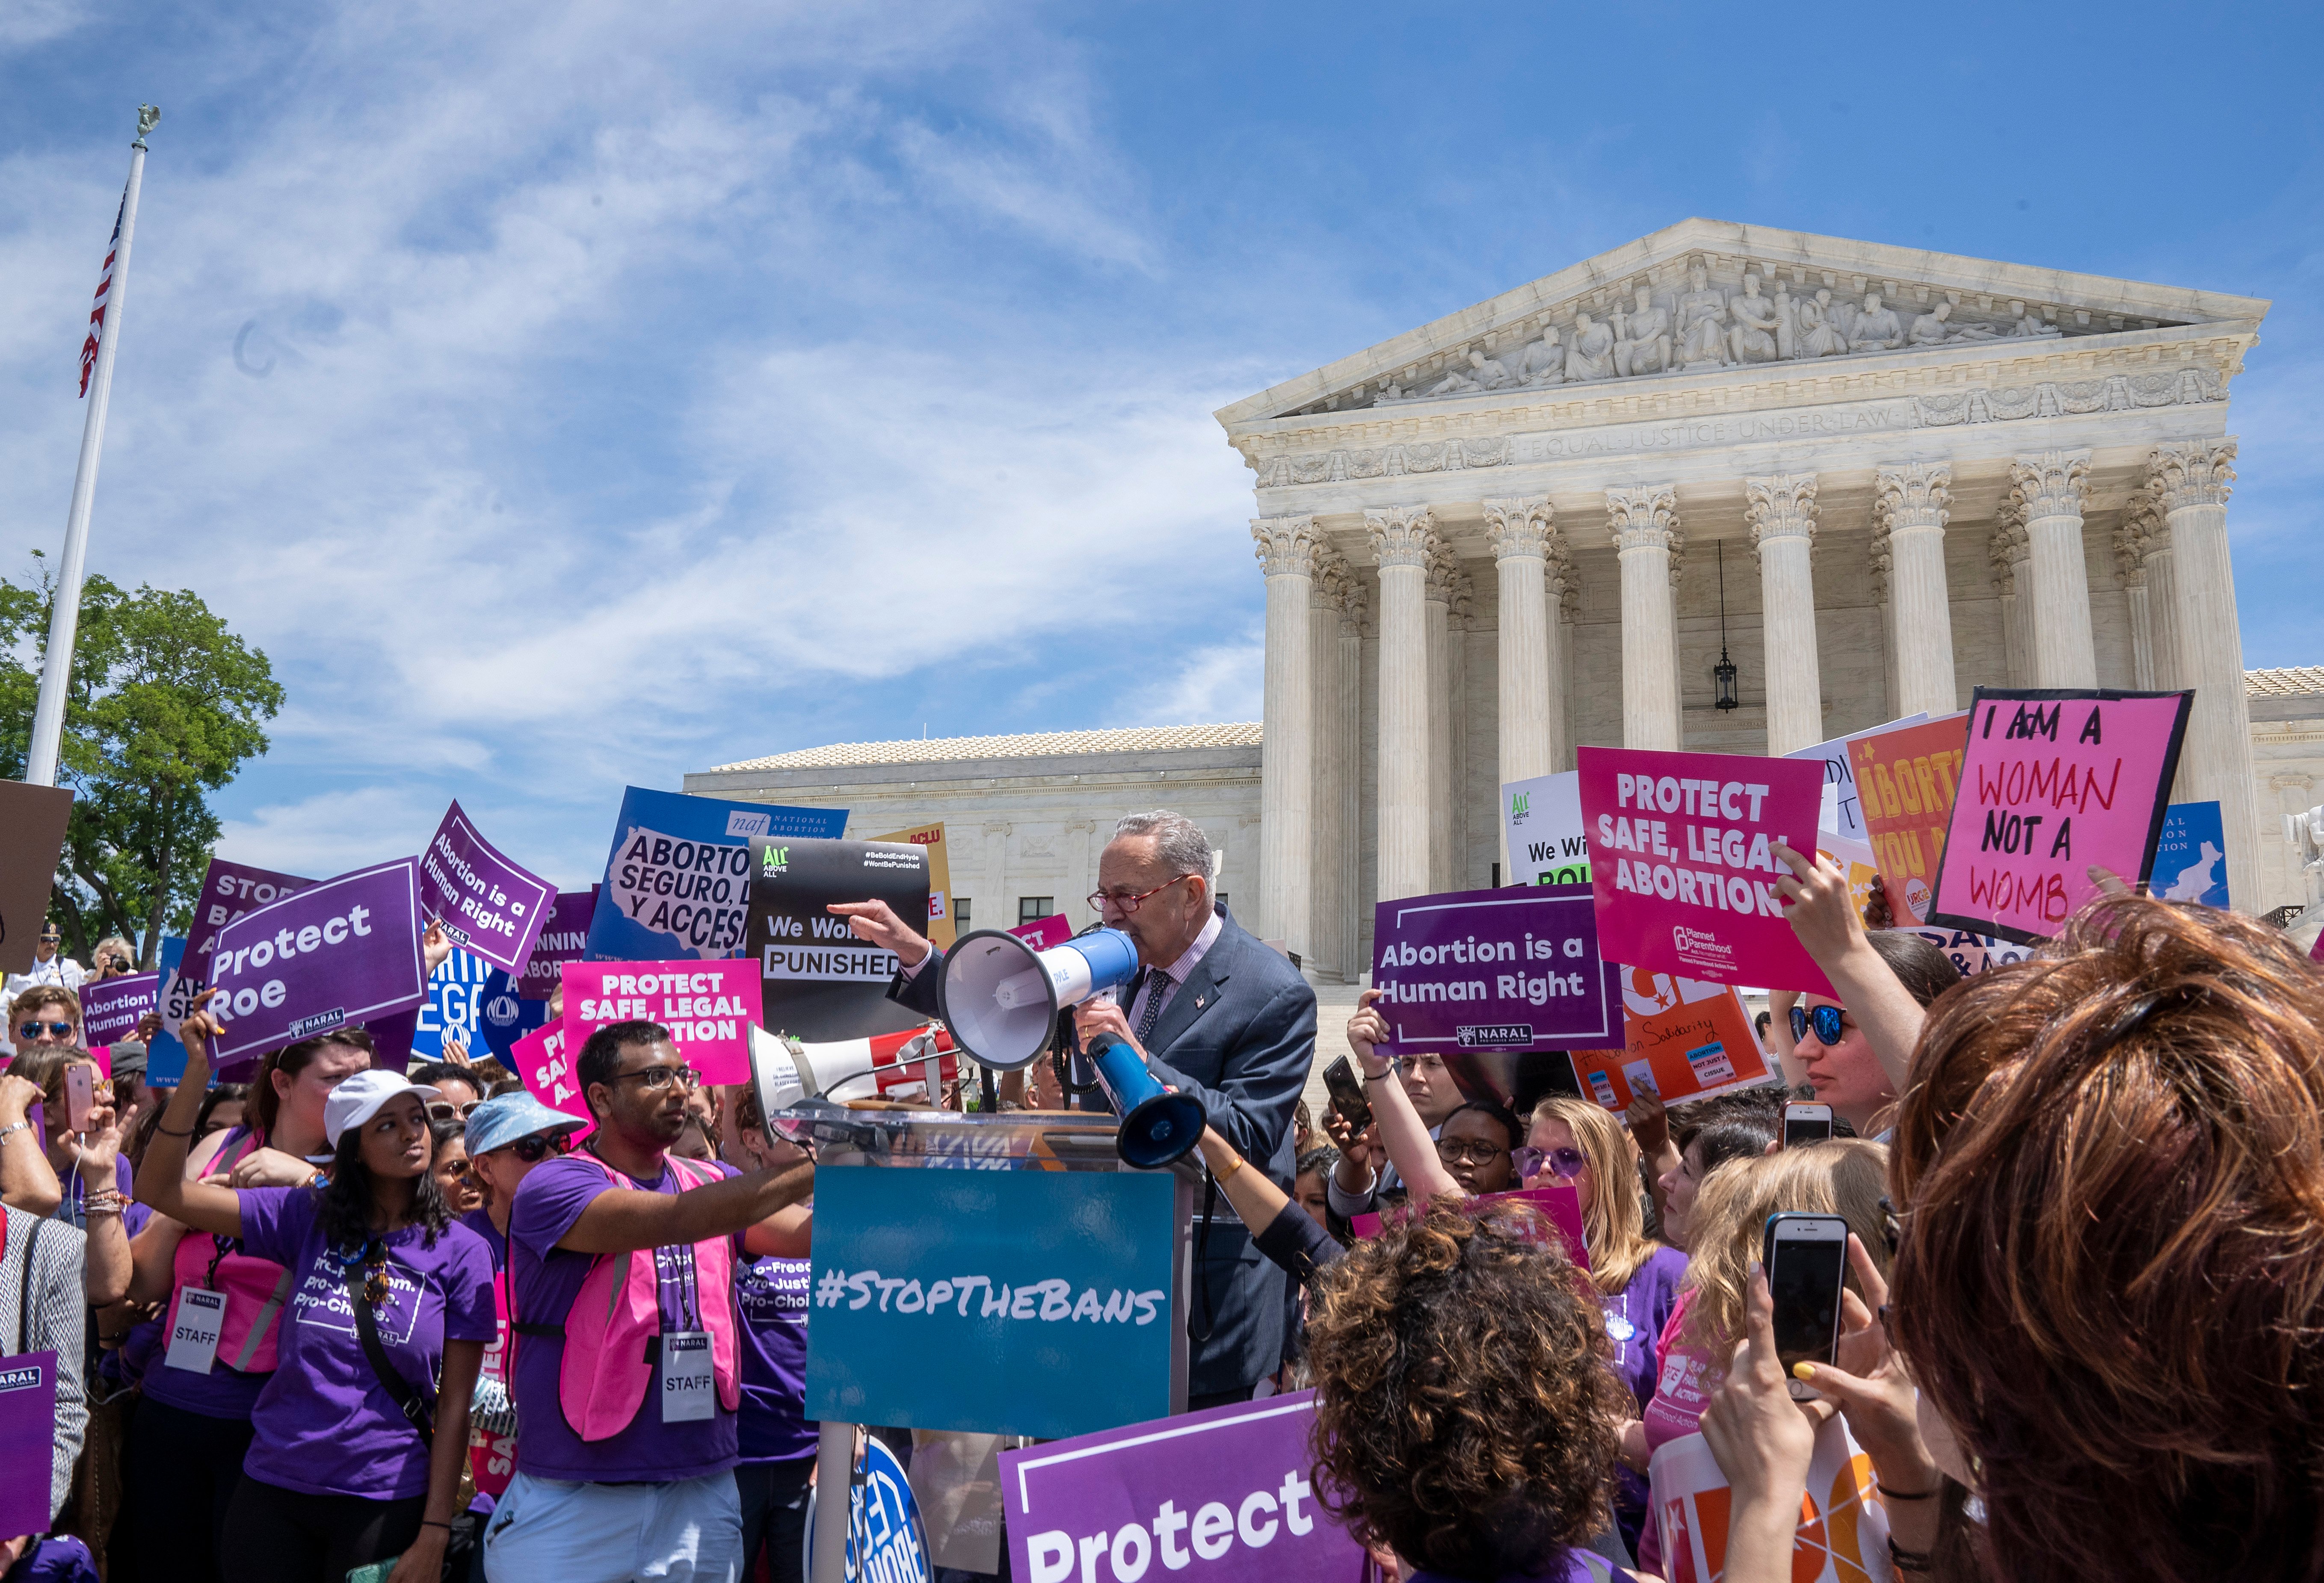 Senate Minority Leader Charles Schumer speaks at a pro-choice rally at the Supreme Court on May 21, 2019. (Tasos Katopodis/Getty Images)